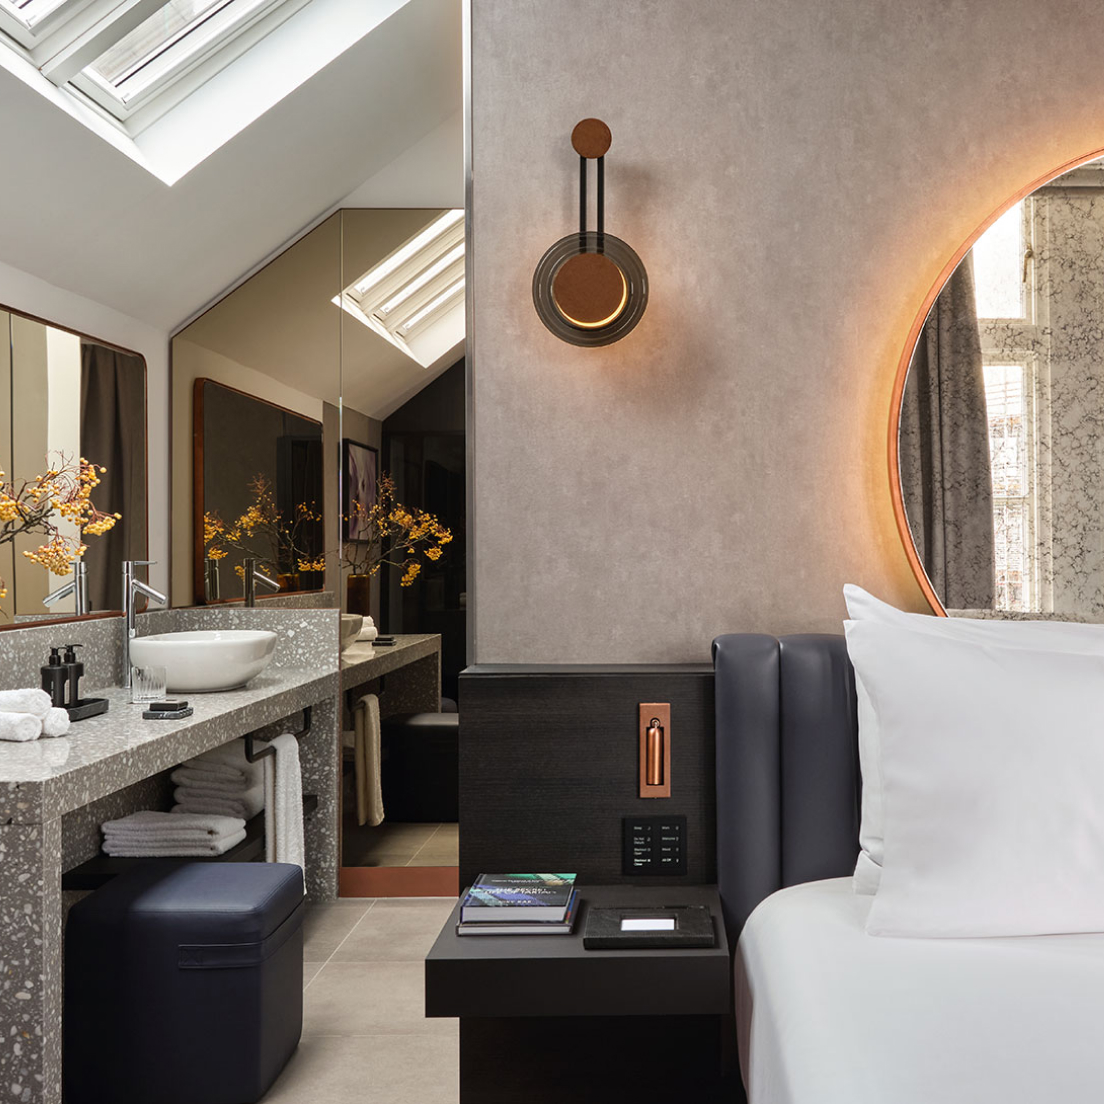 A modern hotel room featuring a neatly made bed with white linens next to a stylish bathroom area. the bathroom has a large mirror, a vanity with two sinks, and a terrazzo counter. ambient lighting enhances the cozy atmosphere.